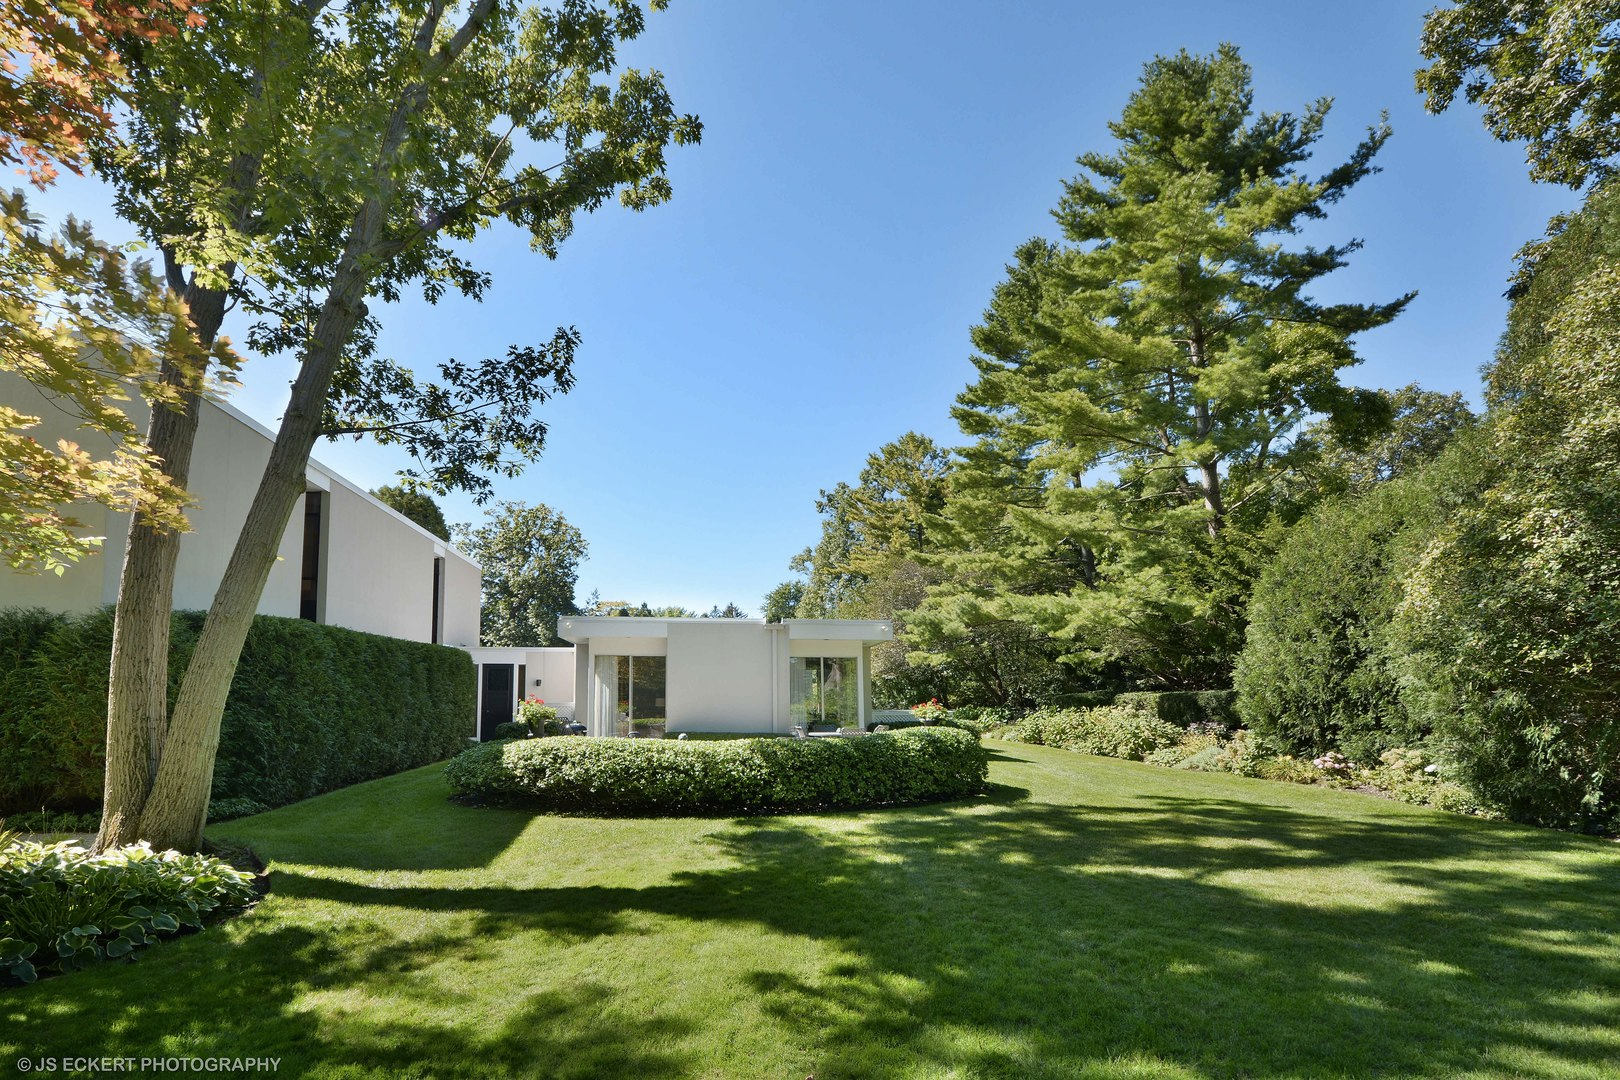 Architect’s perfectly preserved 1965 home hits the market near Chicago